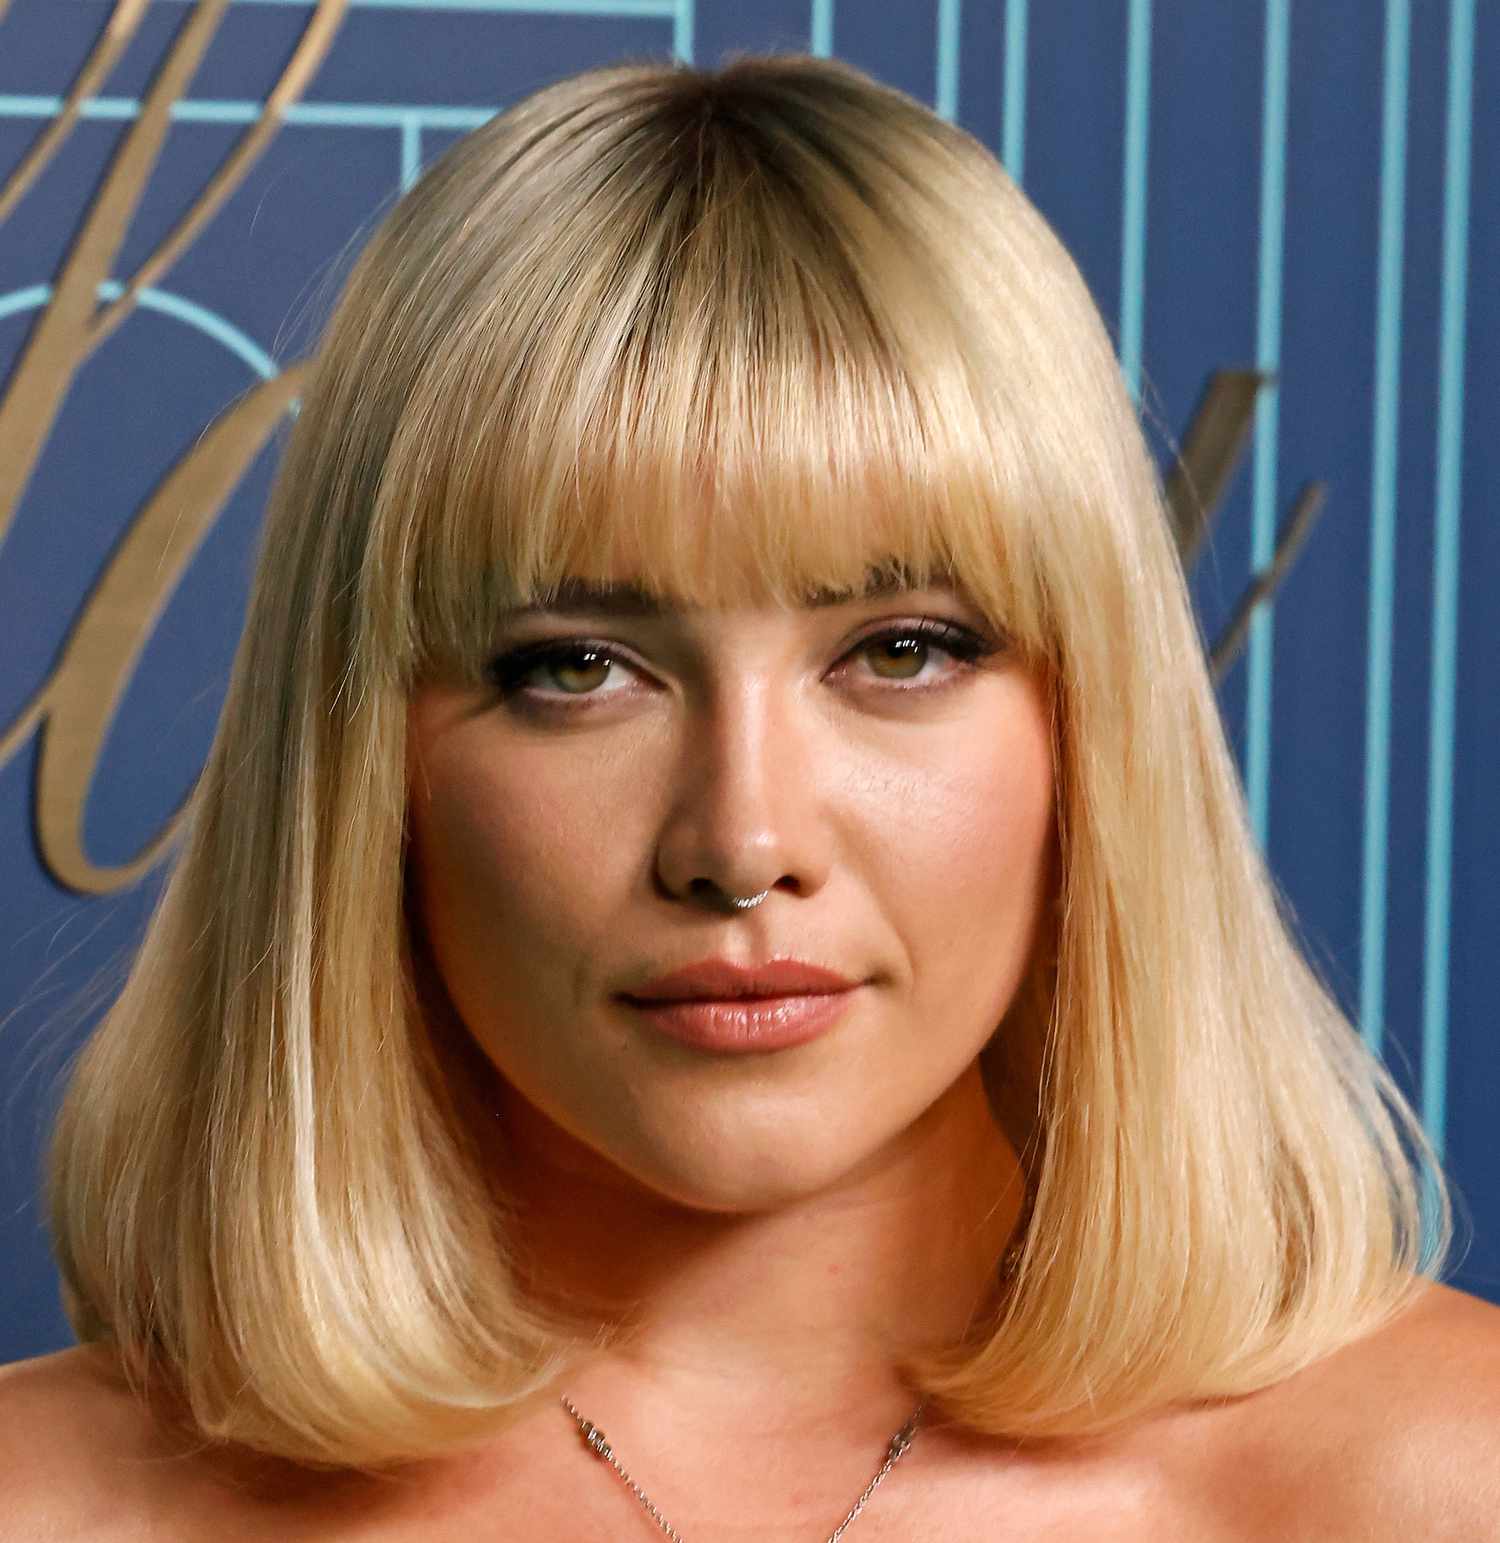 Florence Pugh wears a '70s-inspired hairstyle to a New York City event